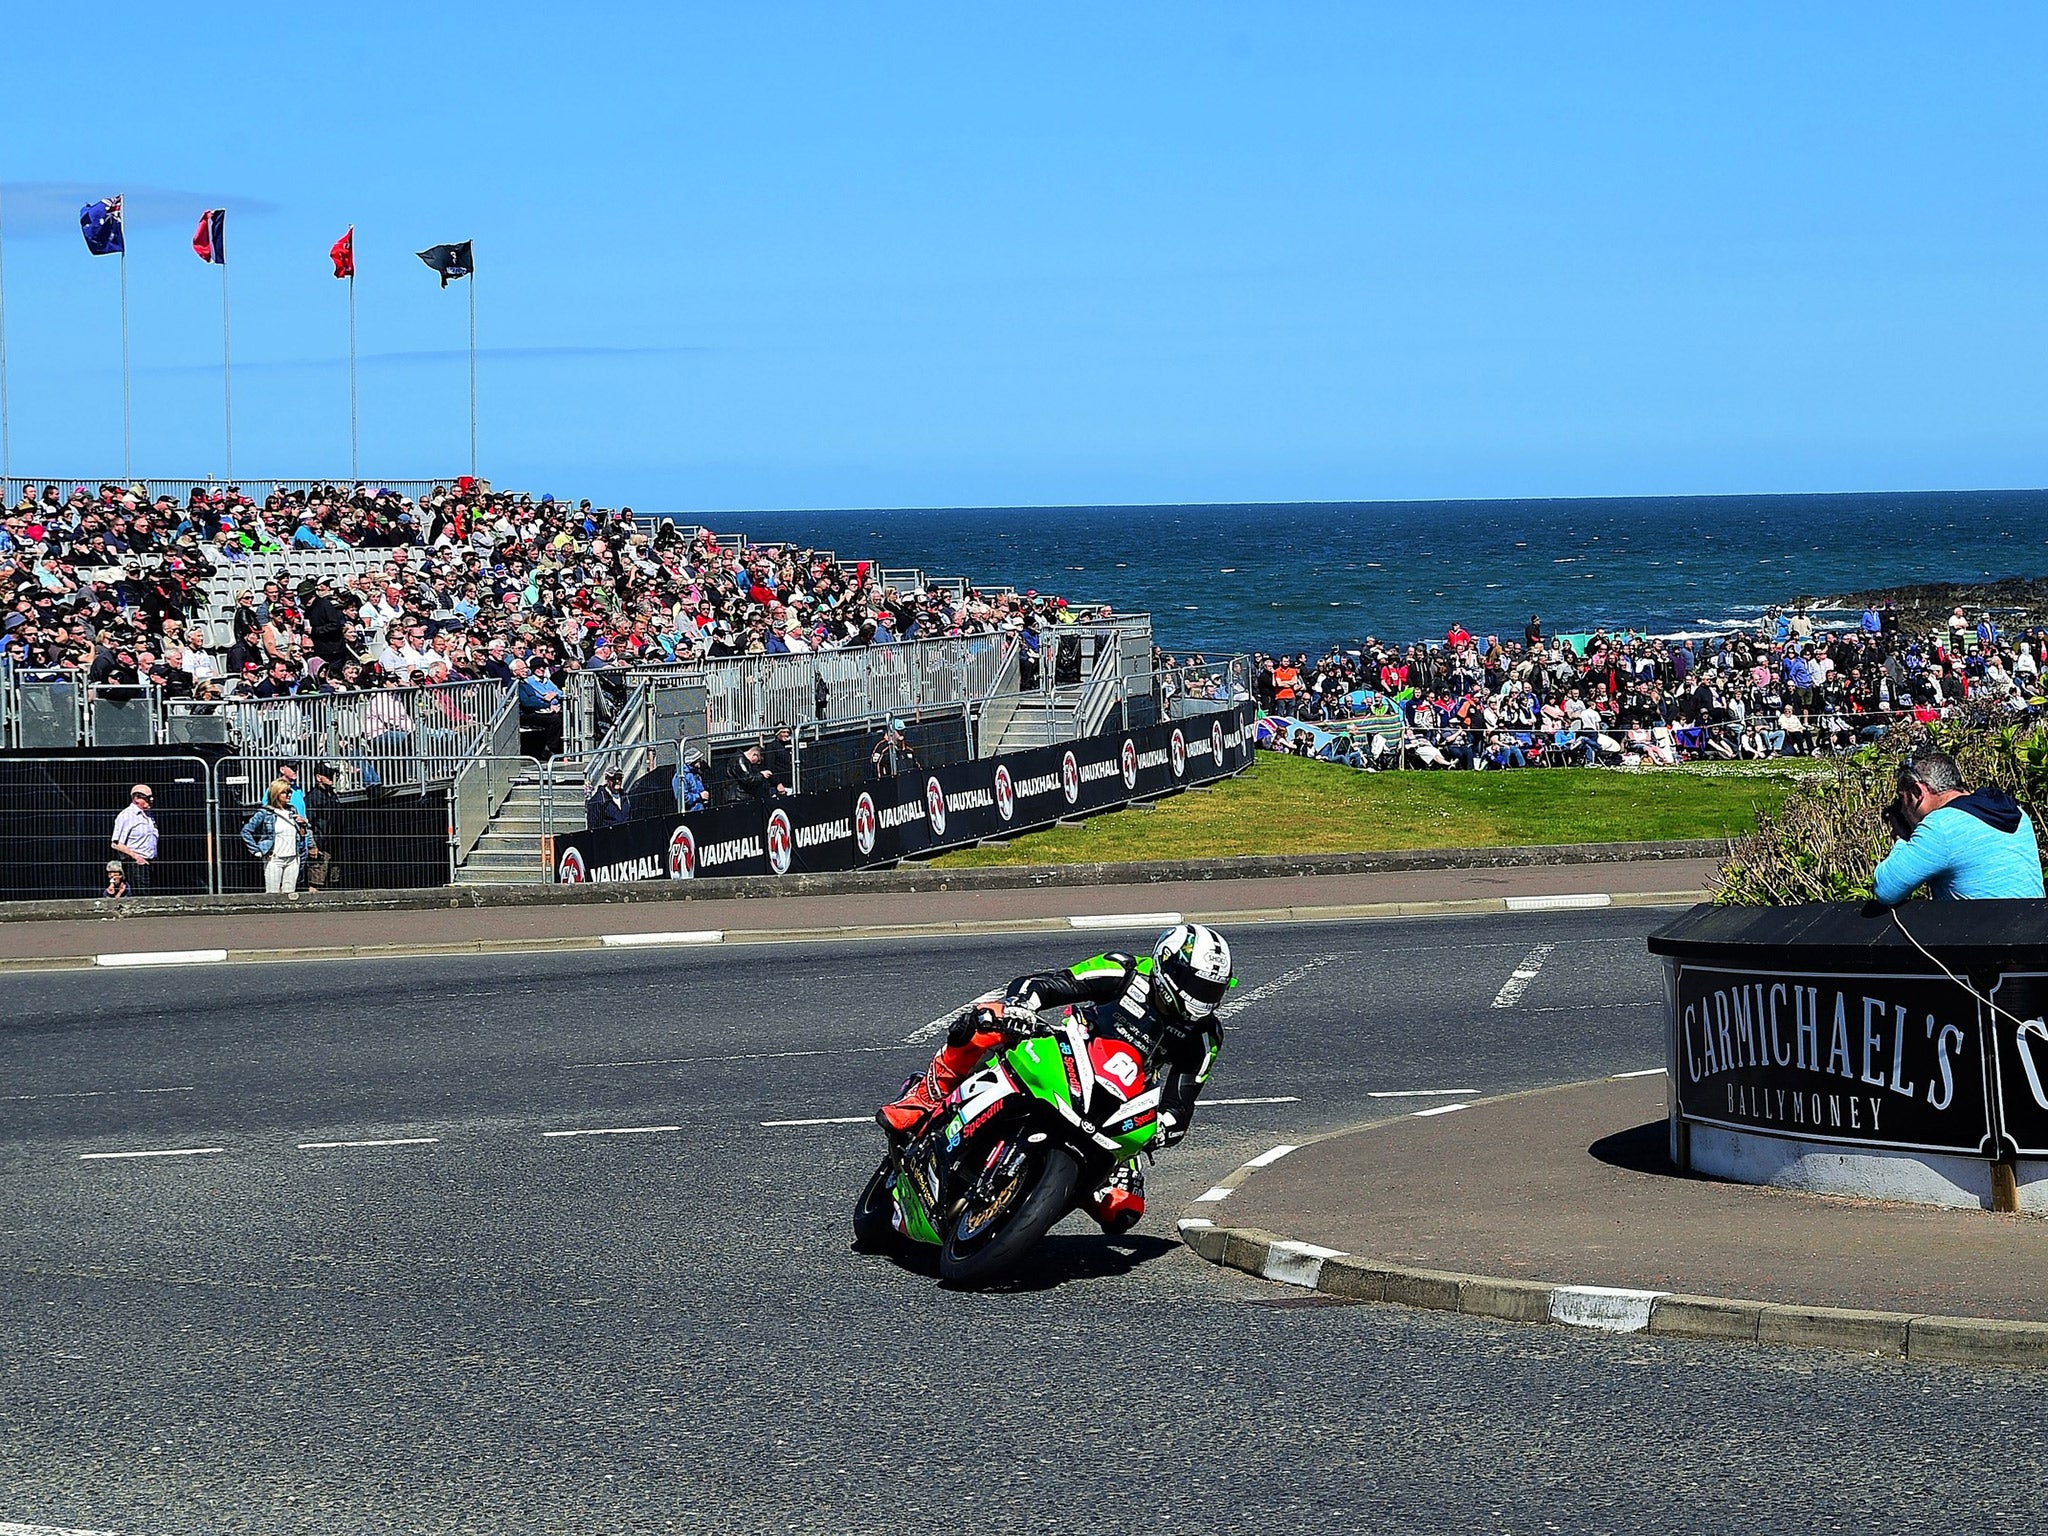 The Isle of Man TT takes place on public roads closed off especially for road races